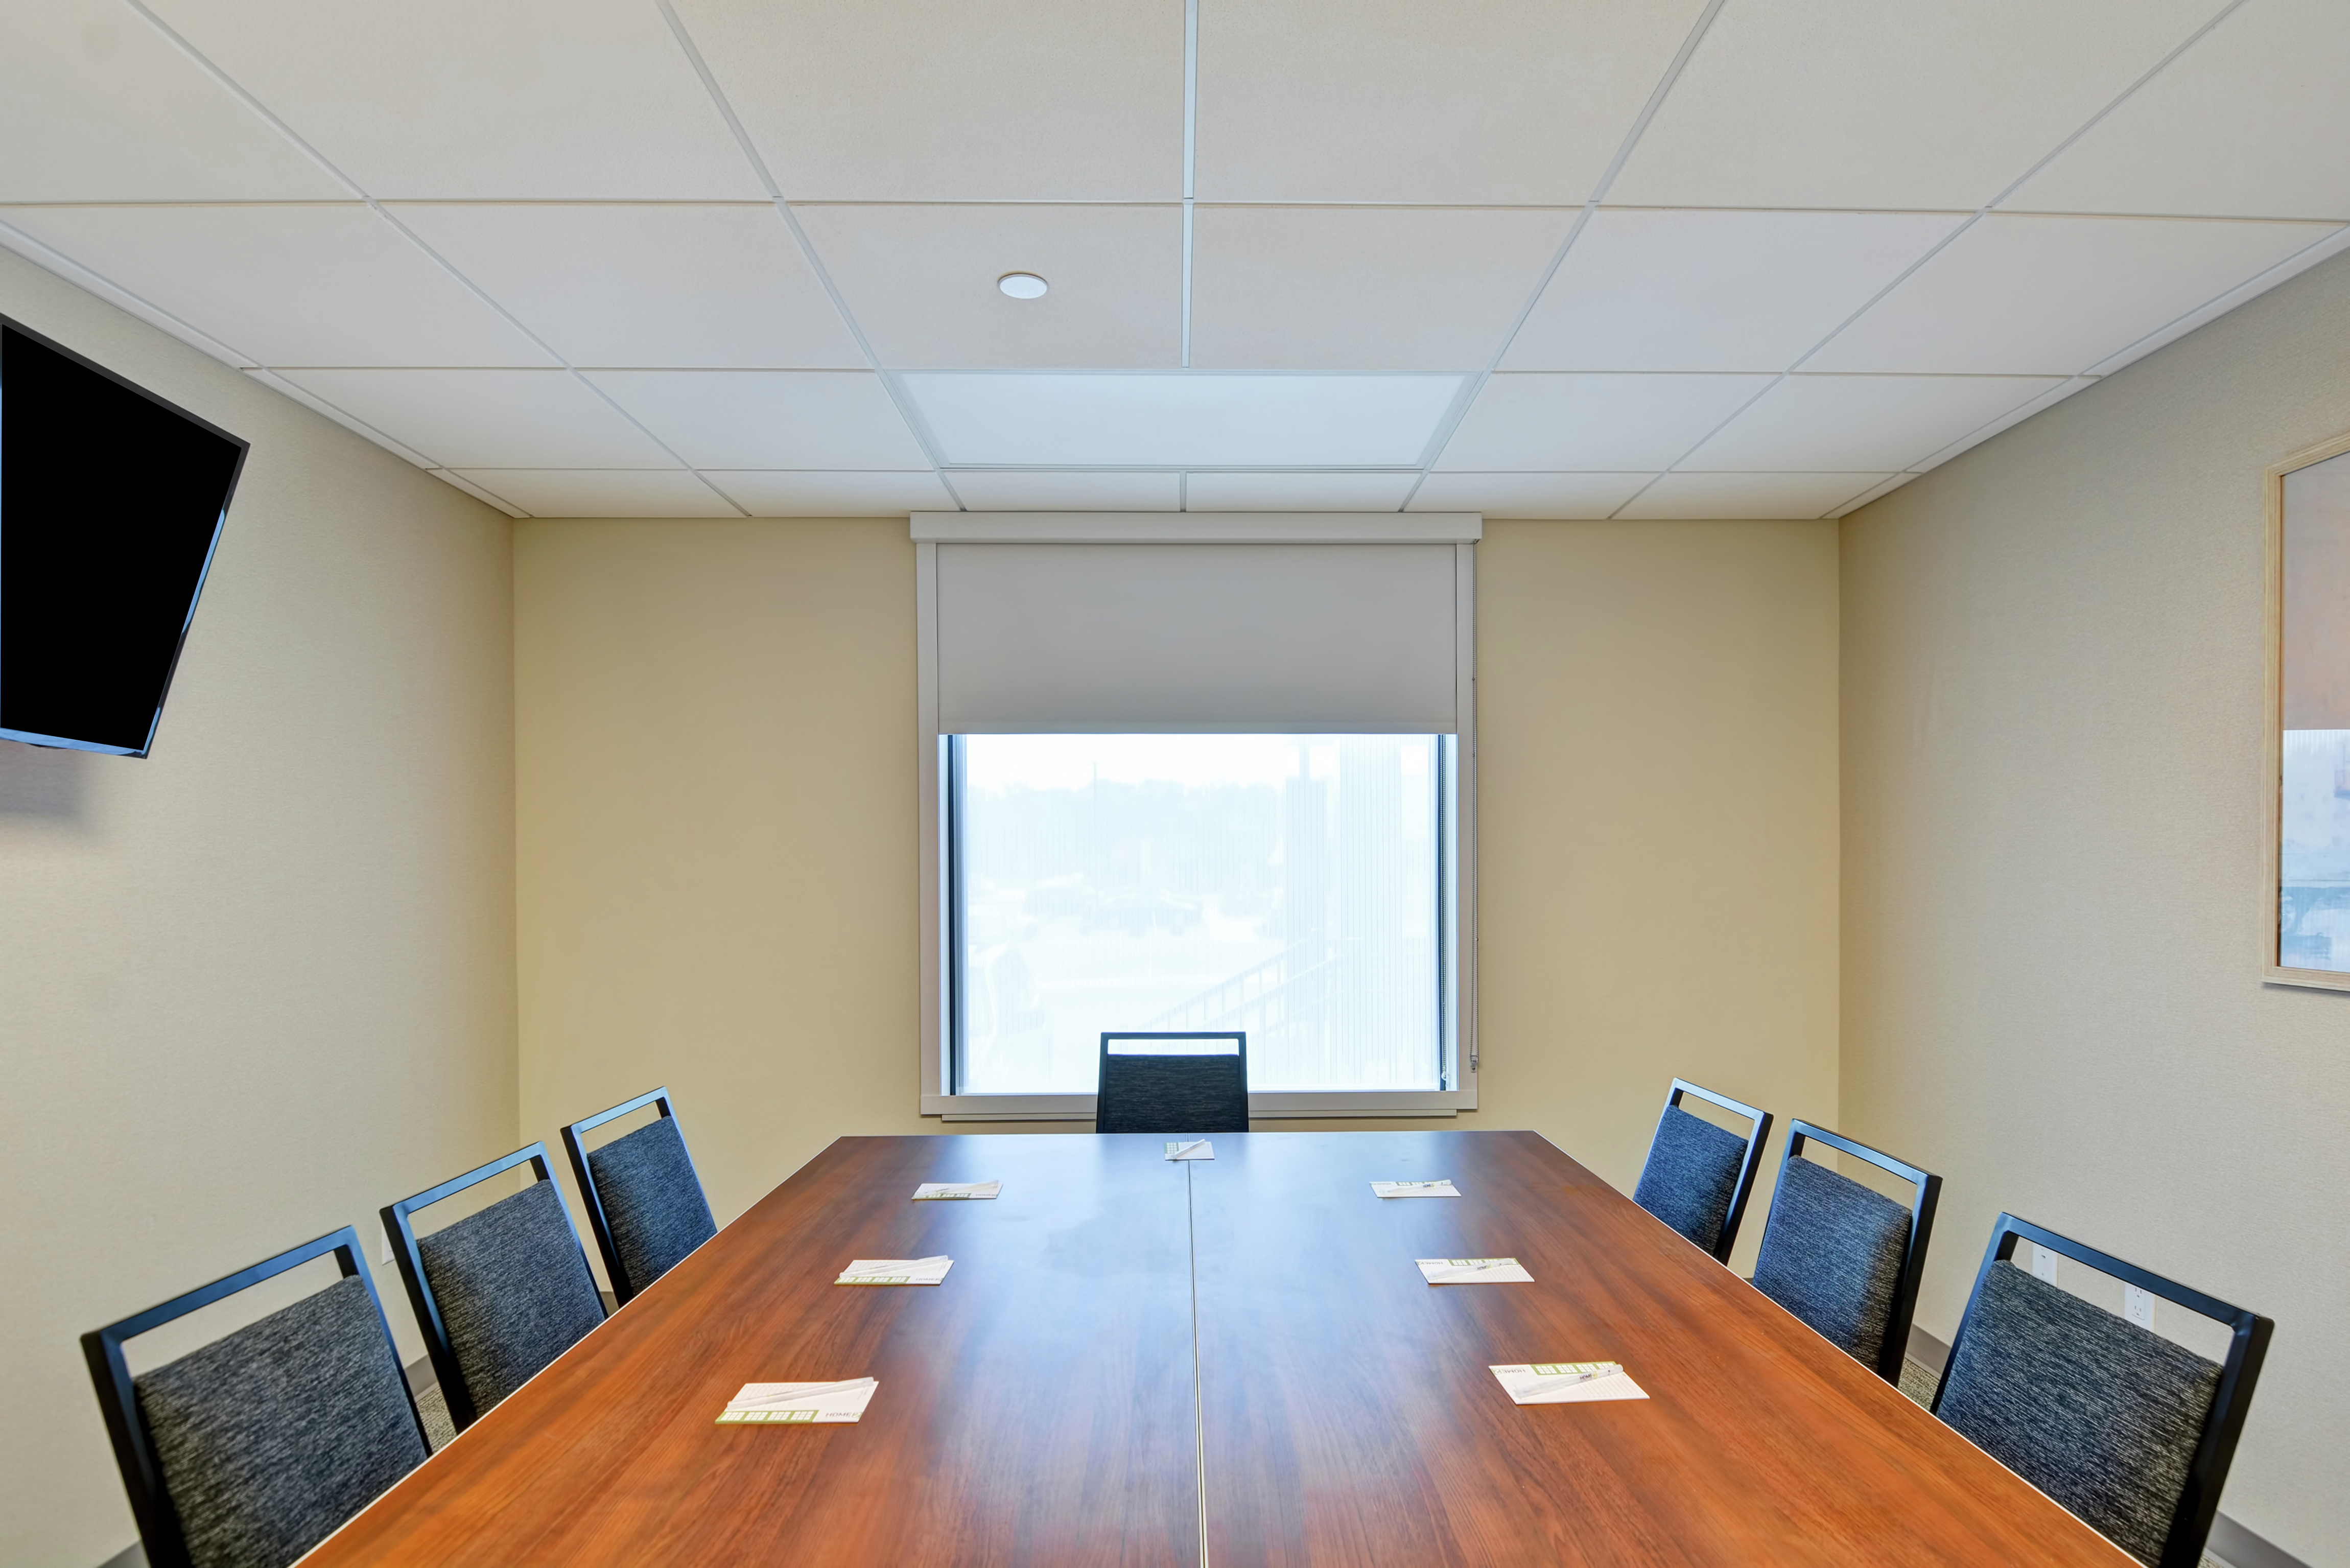 Meeting Room with Boardroom Table and Chairs